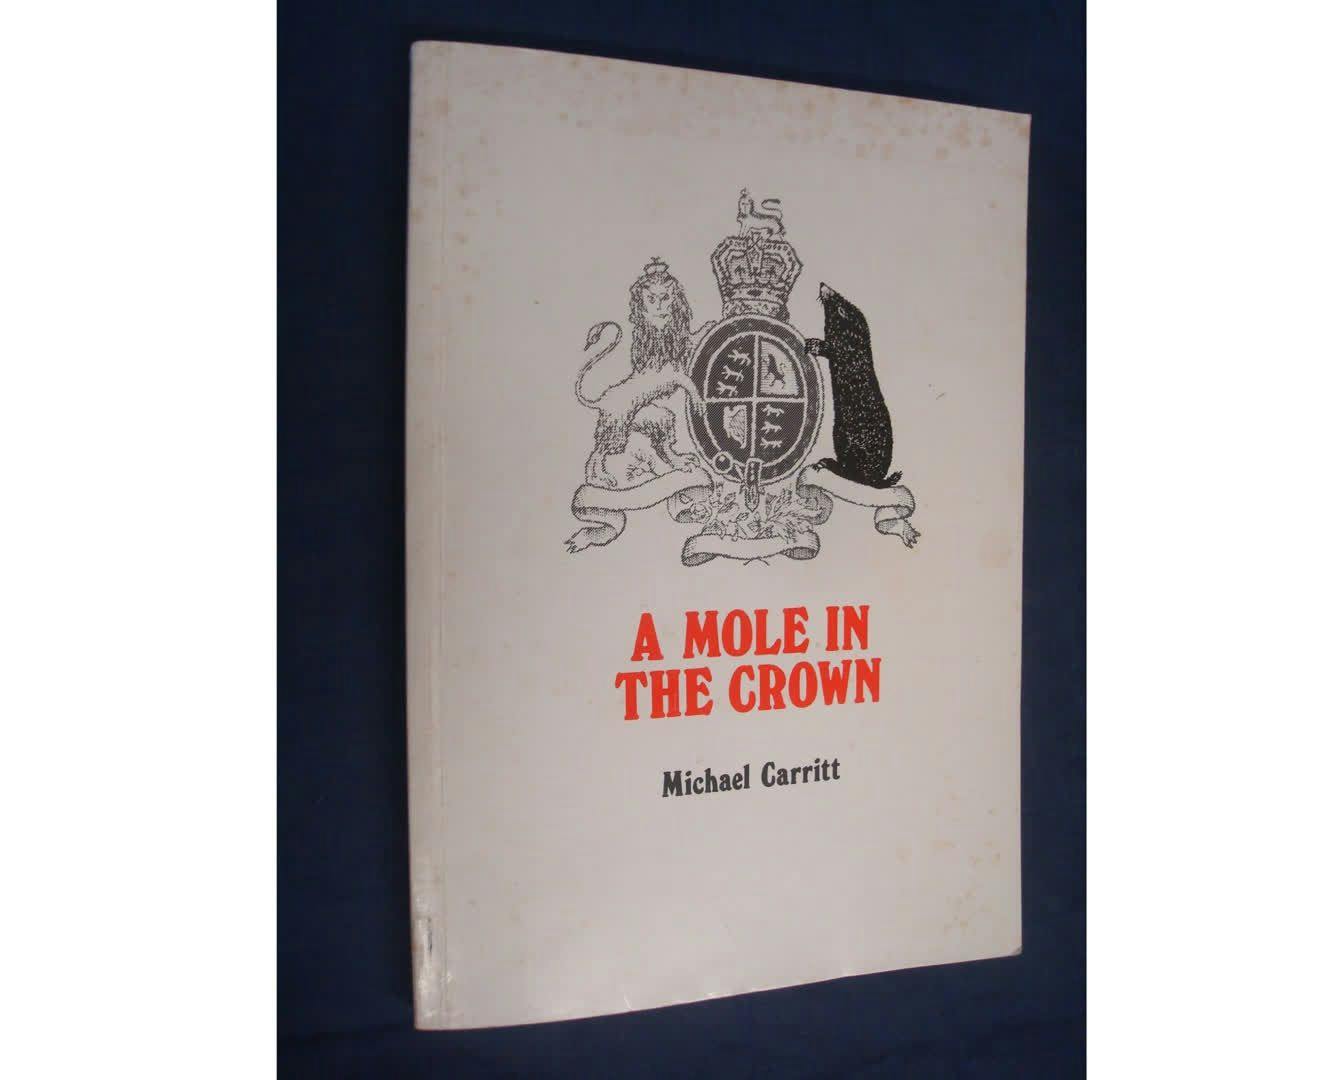 'A Mole In The Crown' by Michael Carritt